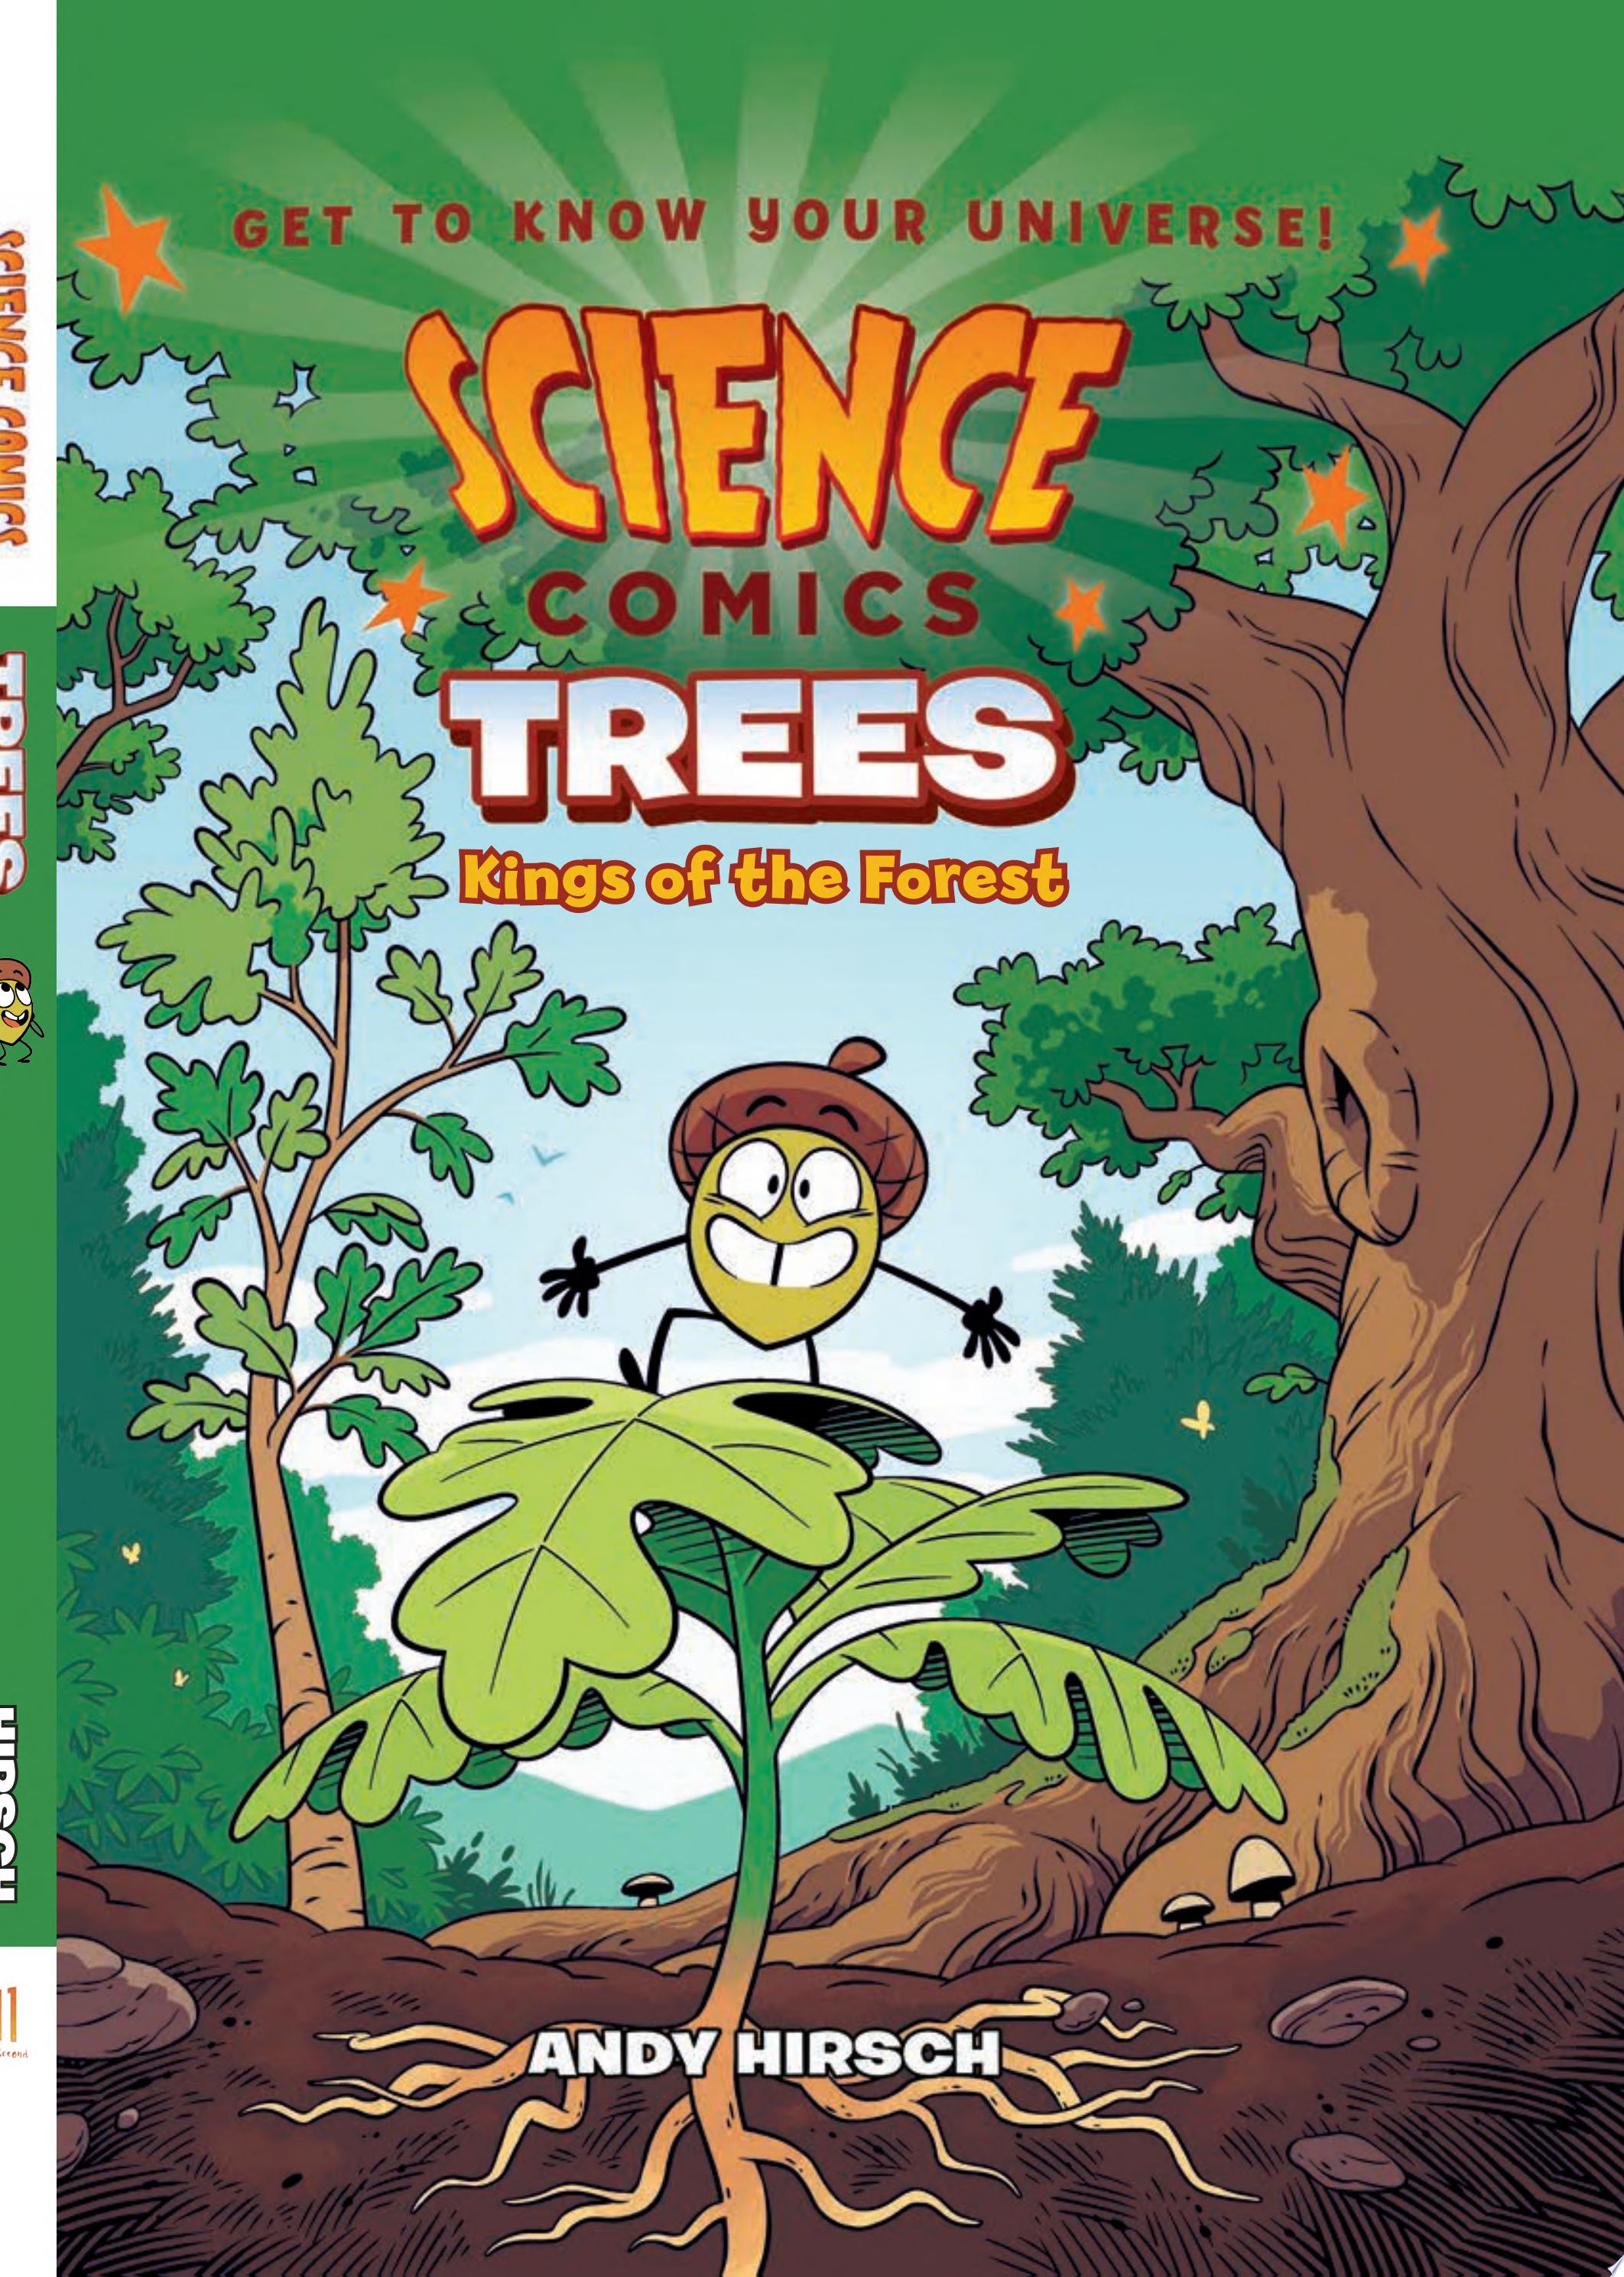 Image for "Science Comics: Trees"